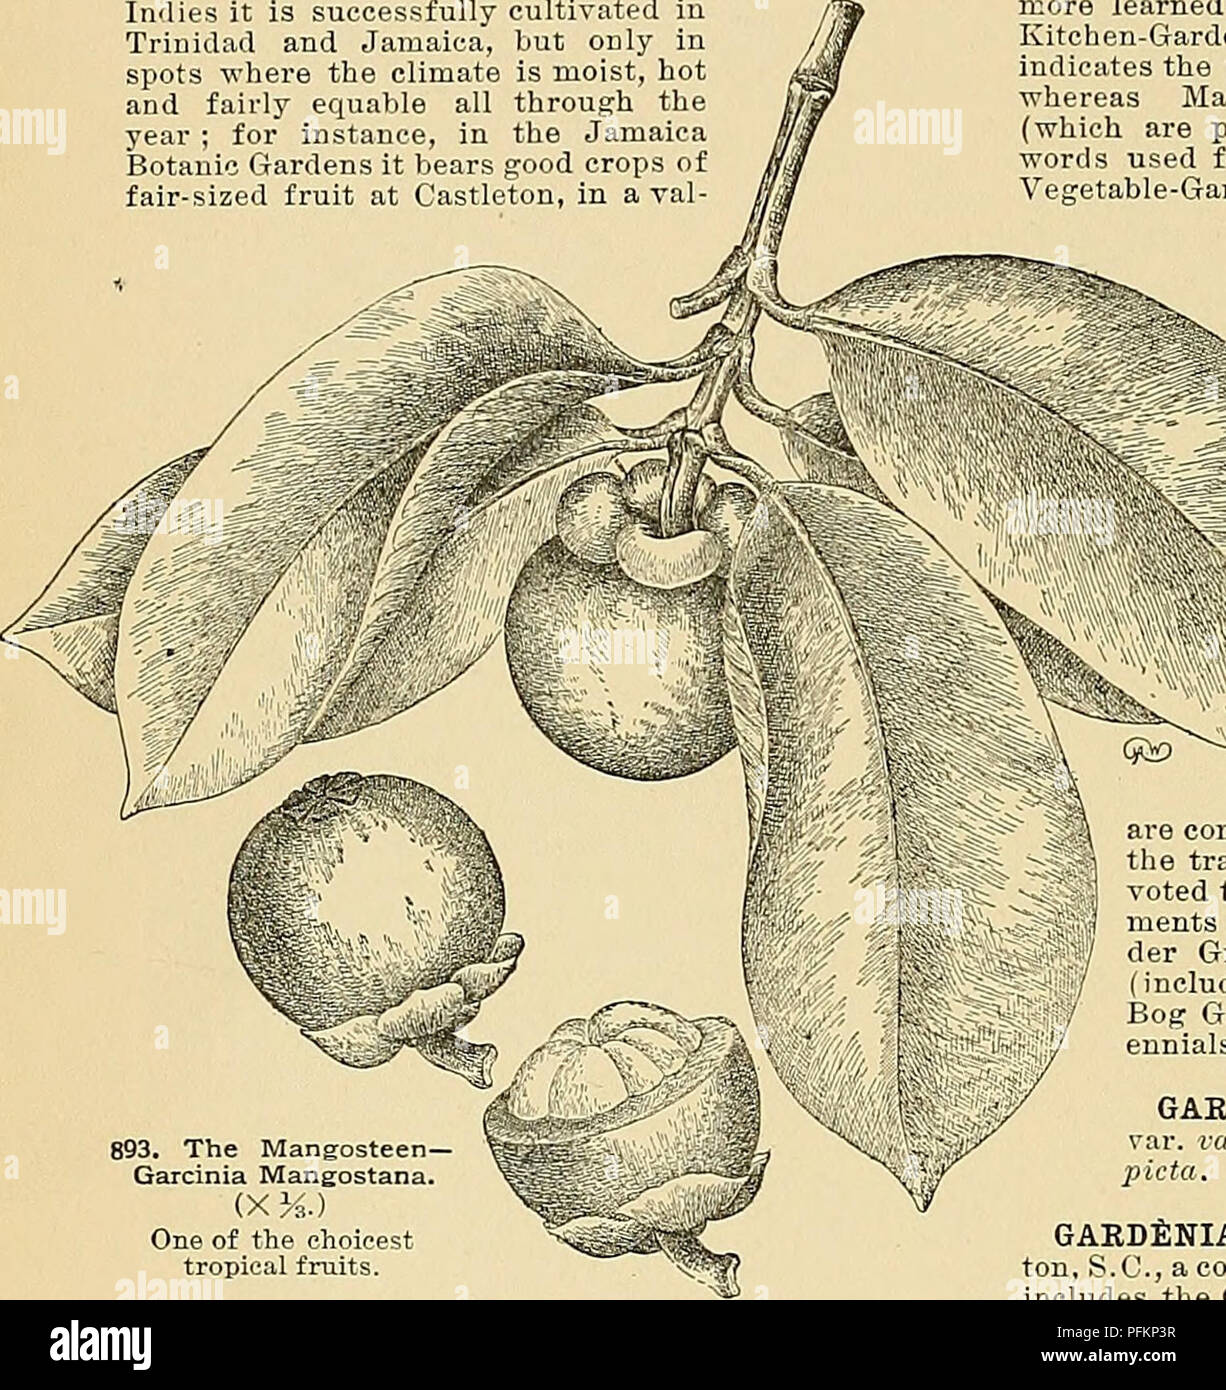 . Cyclopedia of American horticulture, comprising suggestions for cultivation of horticultural plants, descriptions of the species of fruits, vegetables, flowers, and ornamental plants sold in the United States and Canada, together with geographical and biographical sketches. Gardening. 626 GARCINIA GARDENIA is usually regarileil as a consummate achievement in the art of gardening. Mangostana, Linn. Mangosteen. Pig. 893. Height 20 ft.: Ivs. 7-8 in. long, elliptic: fls. reddish; petals 4: fr. about2&gt;^in. indiam. B.M. 4847. L.B.C. 9:845. F.S. 22:2359. G.C. II. 4:657. Mortlla, Desr. Gamboge Tr Stock Photo